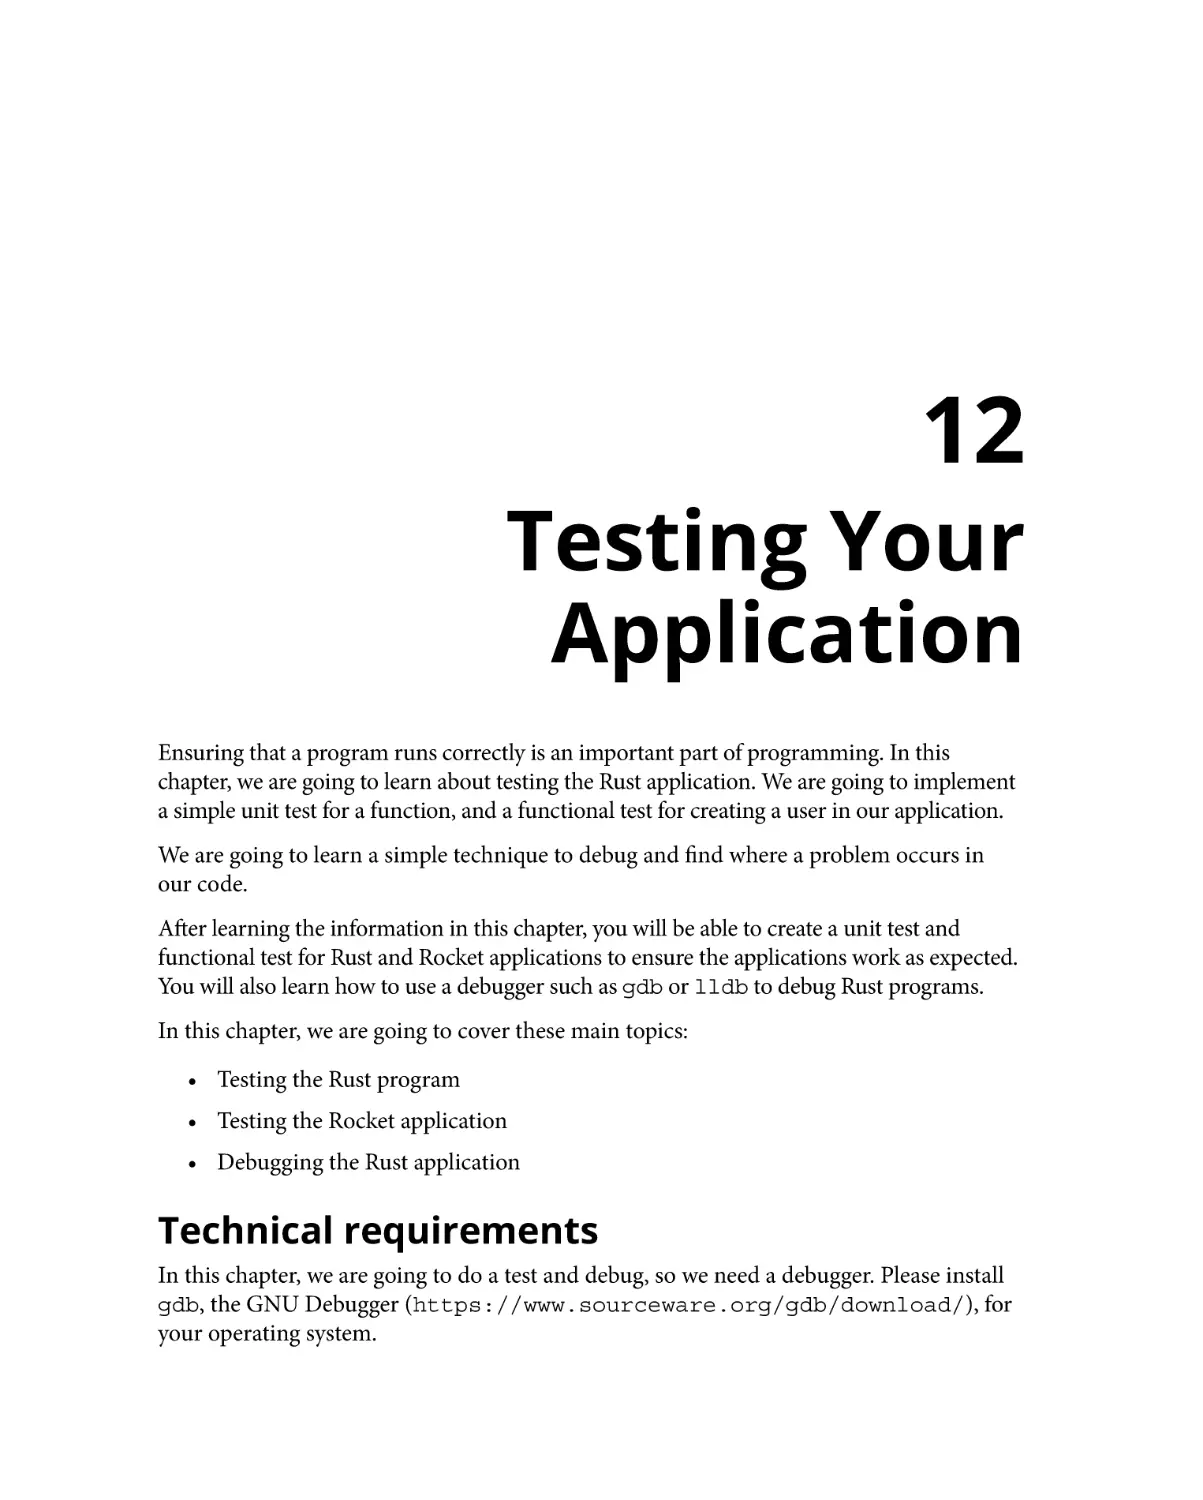 Chapter 12
Technical requirements